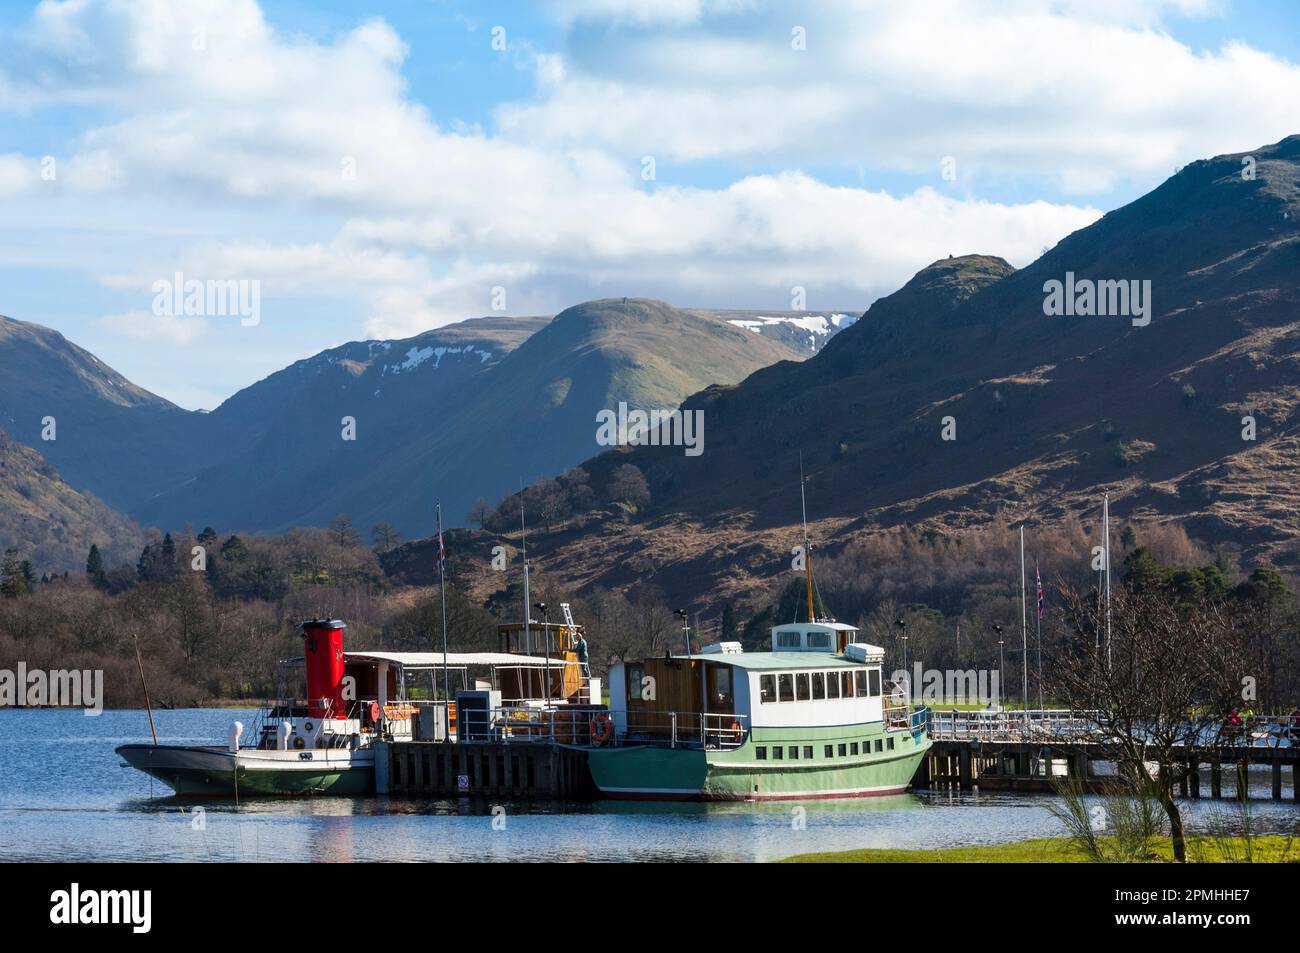 Two lake steamers await tourists at Glenridding Pier, Ullswater, Lake District National Park, Cumbria, England Stock Photo